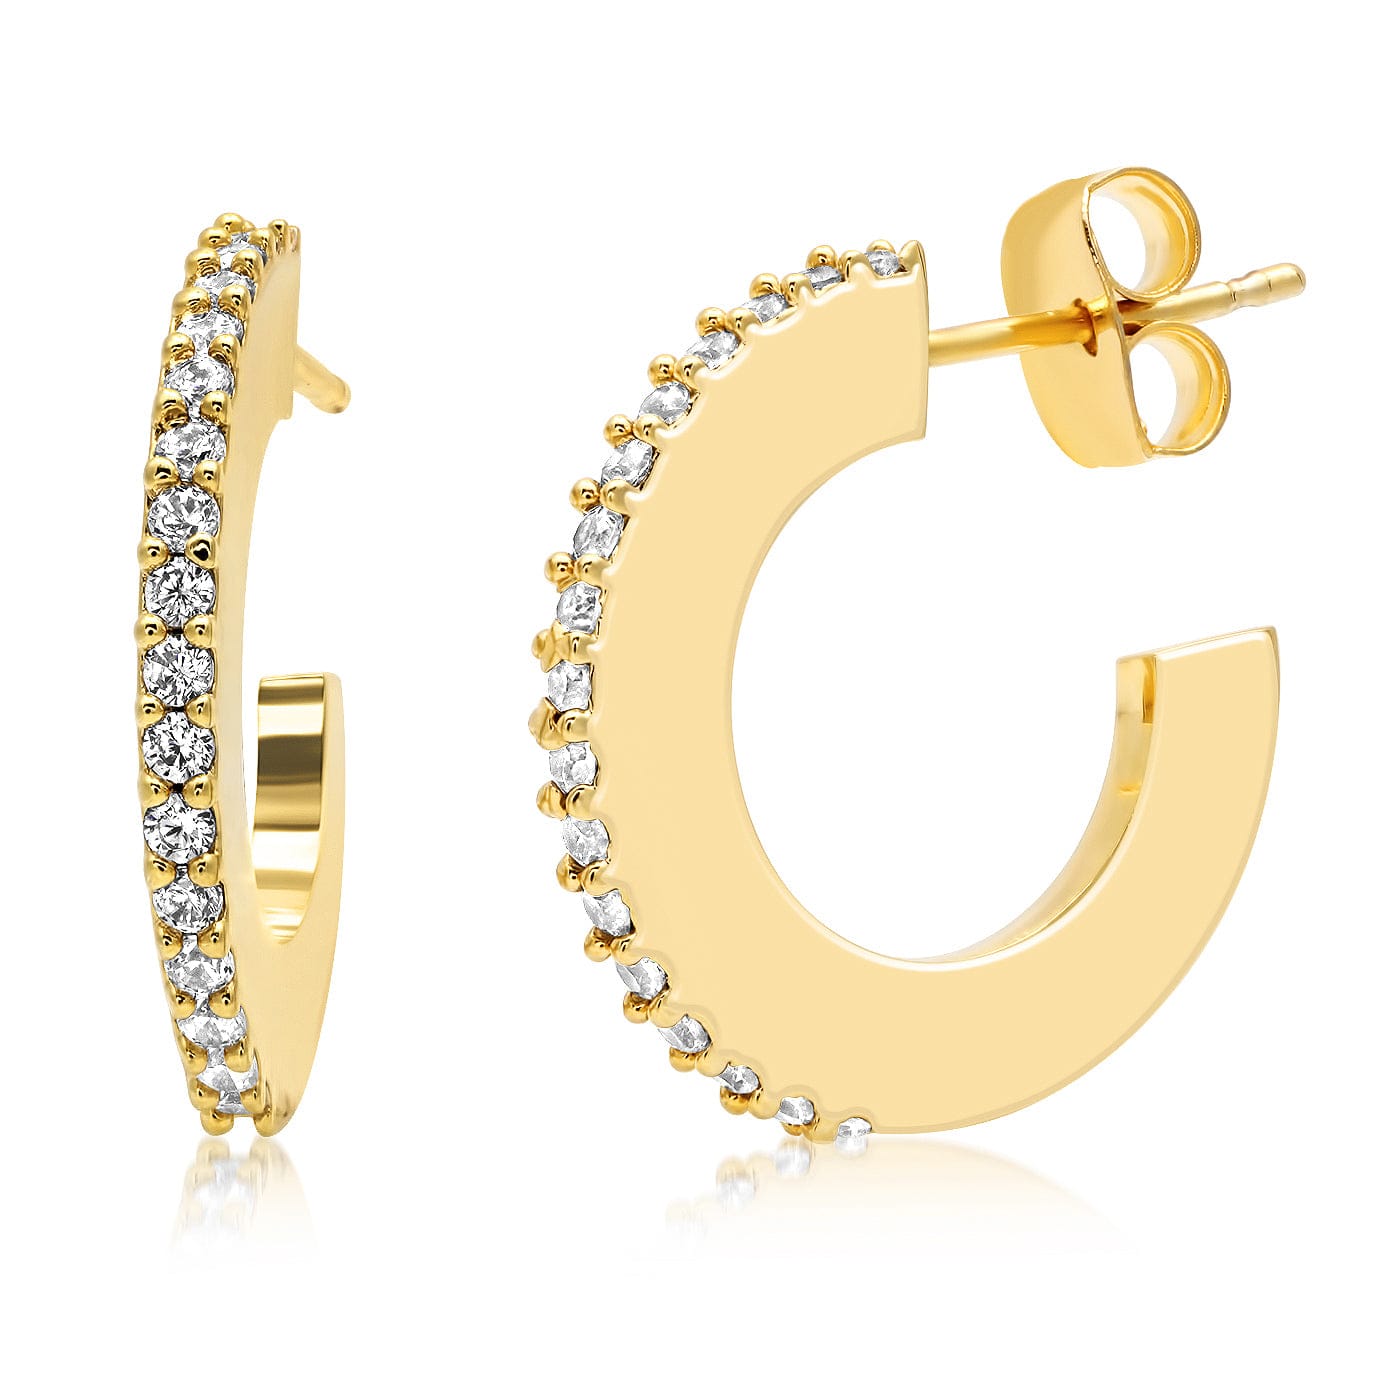 TAI JEWELRY Earrings Gold Open Hoops With Pave Accents